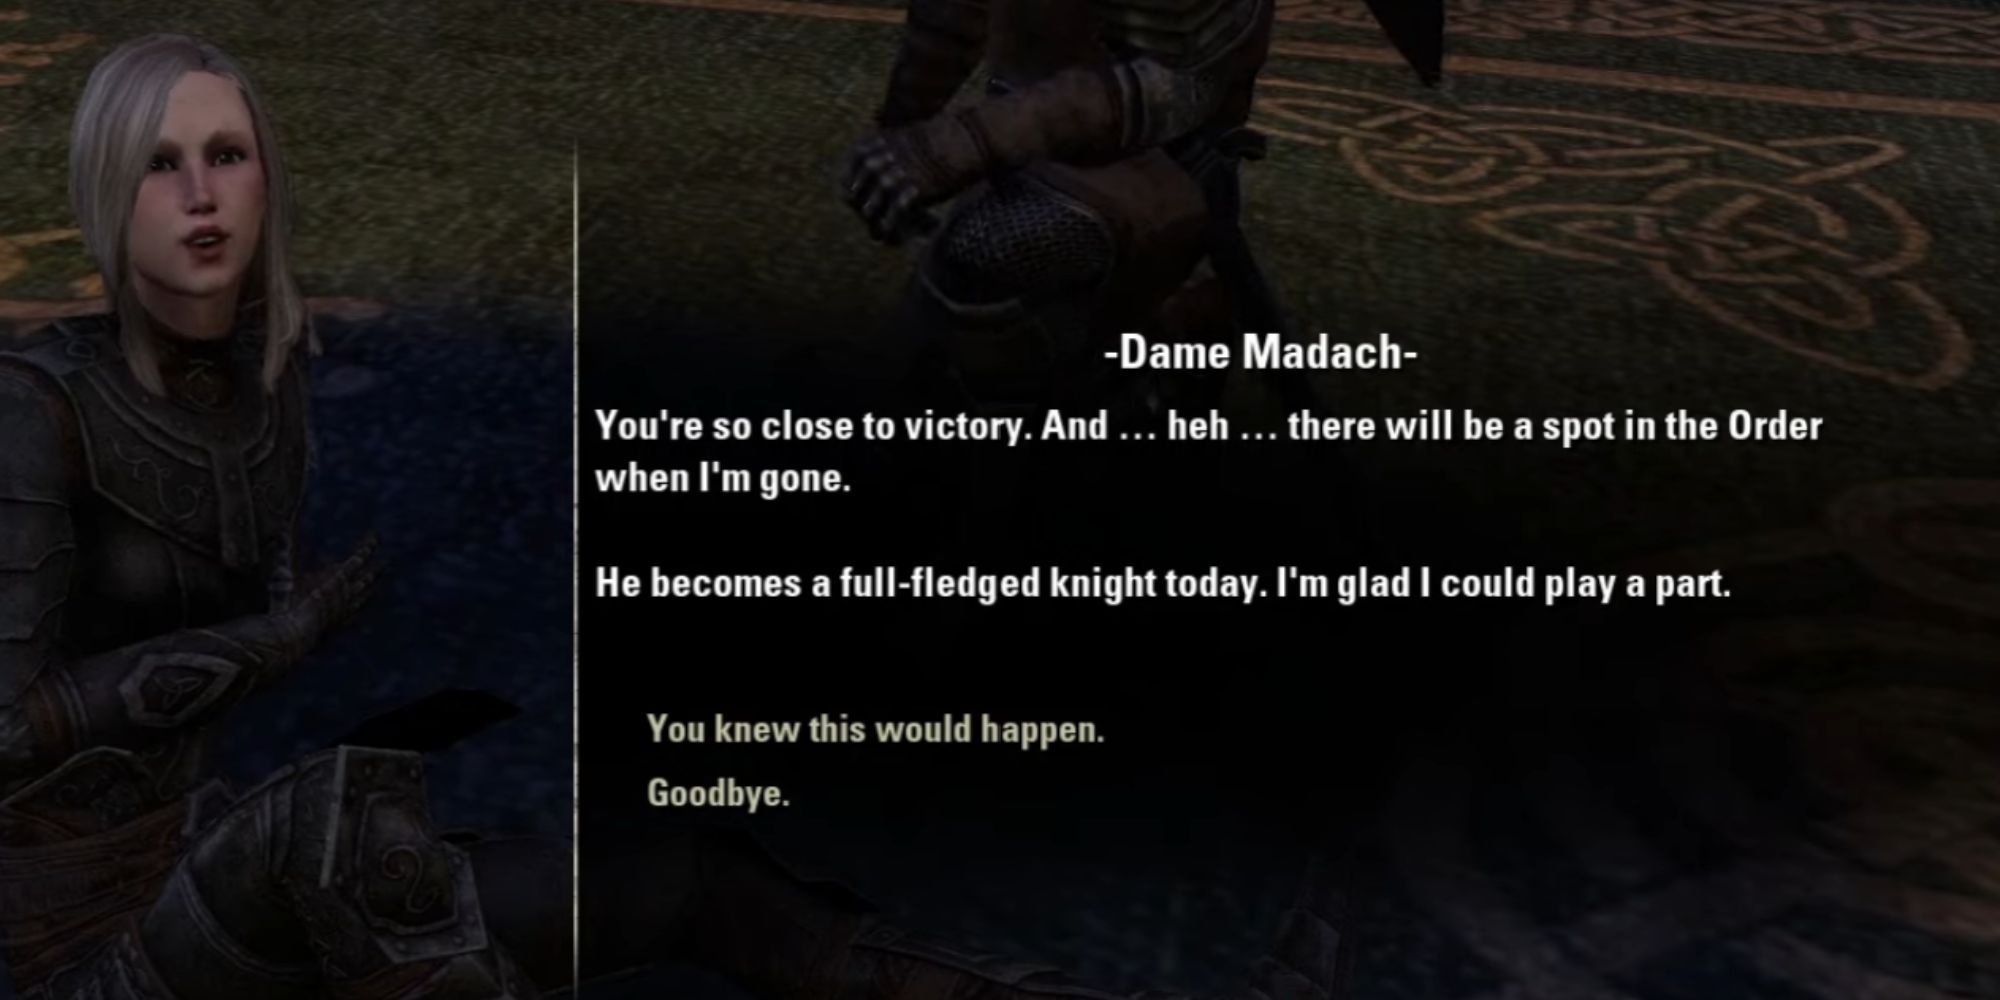 ESO Dame Madach Talking To The Player